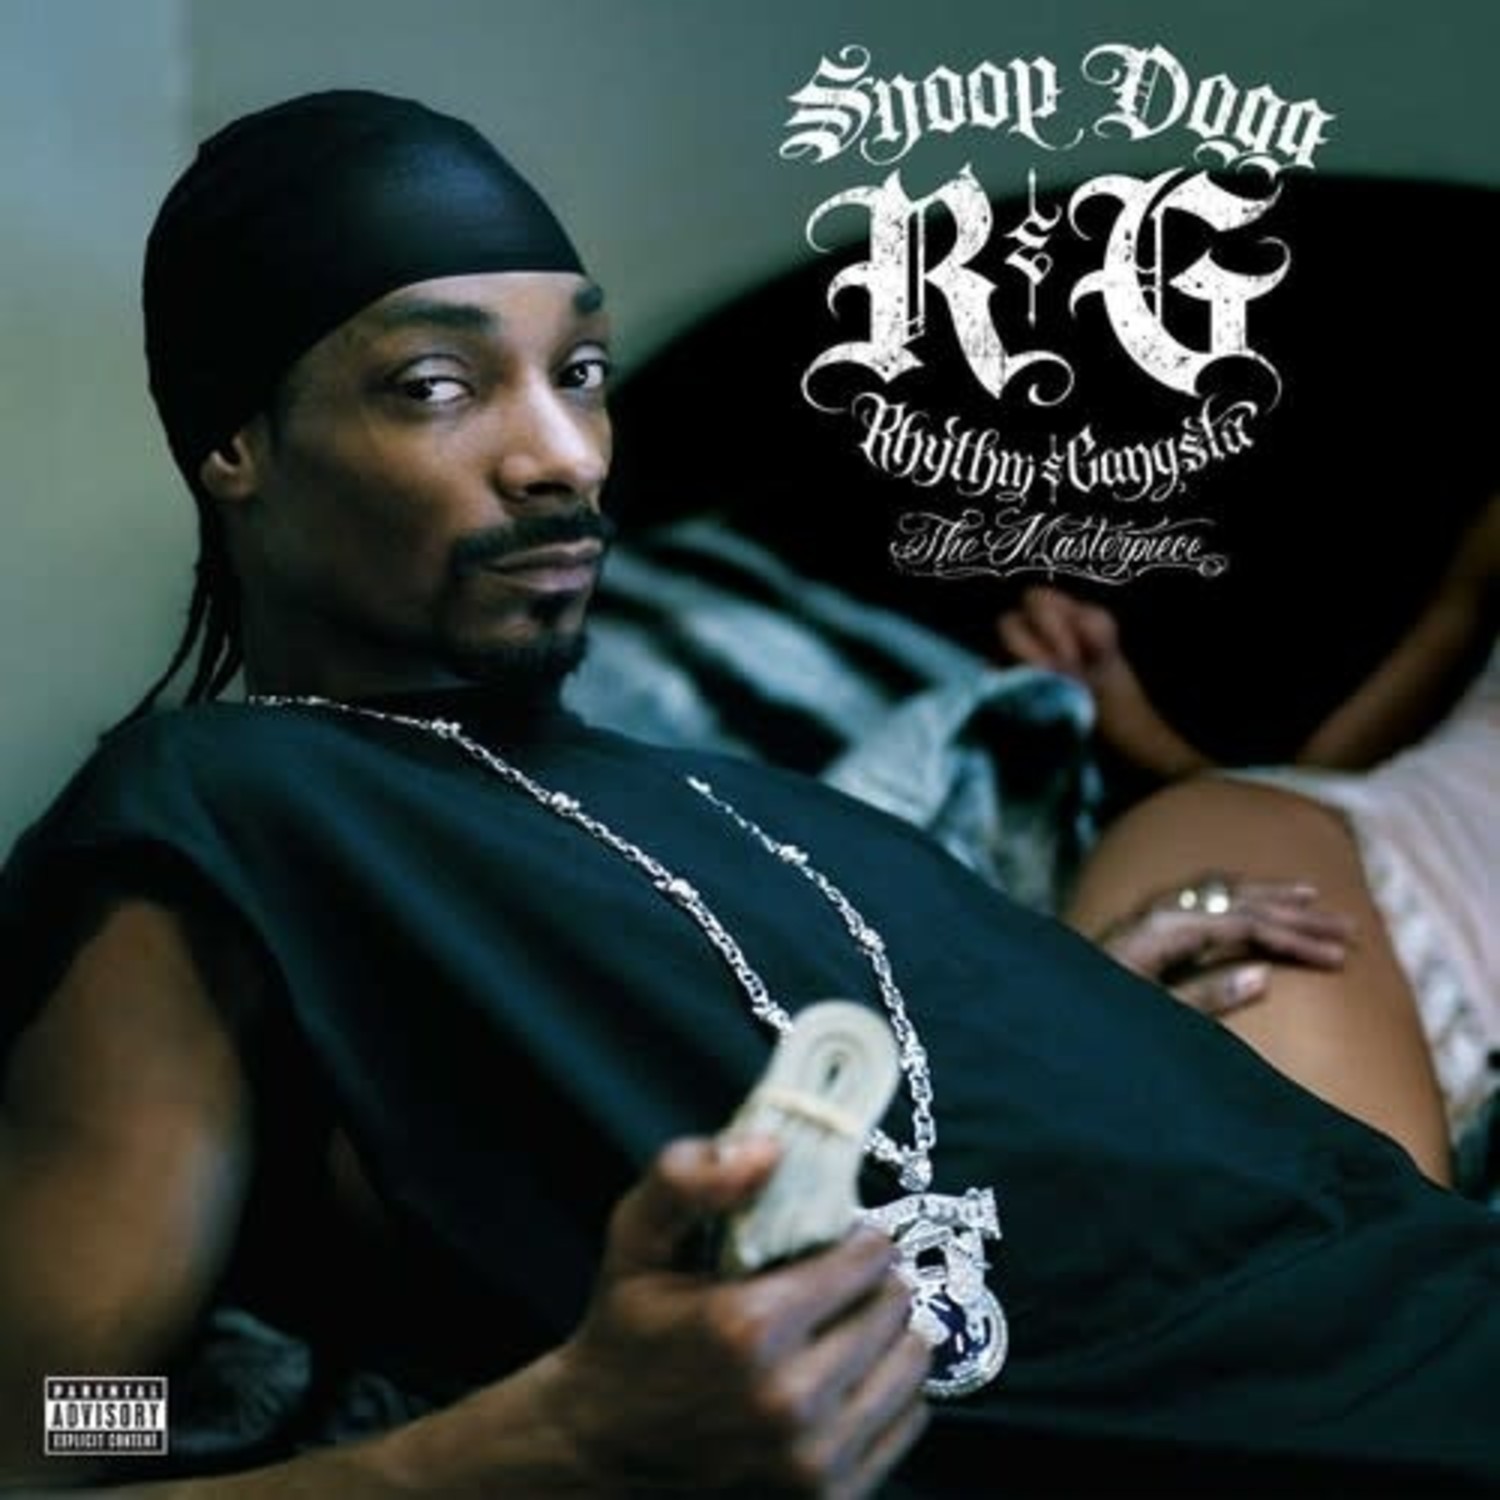 Snoop Dogg - Da Game Is To Be Sold, Not To Be Told [2 LP] -  Music